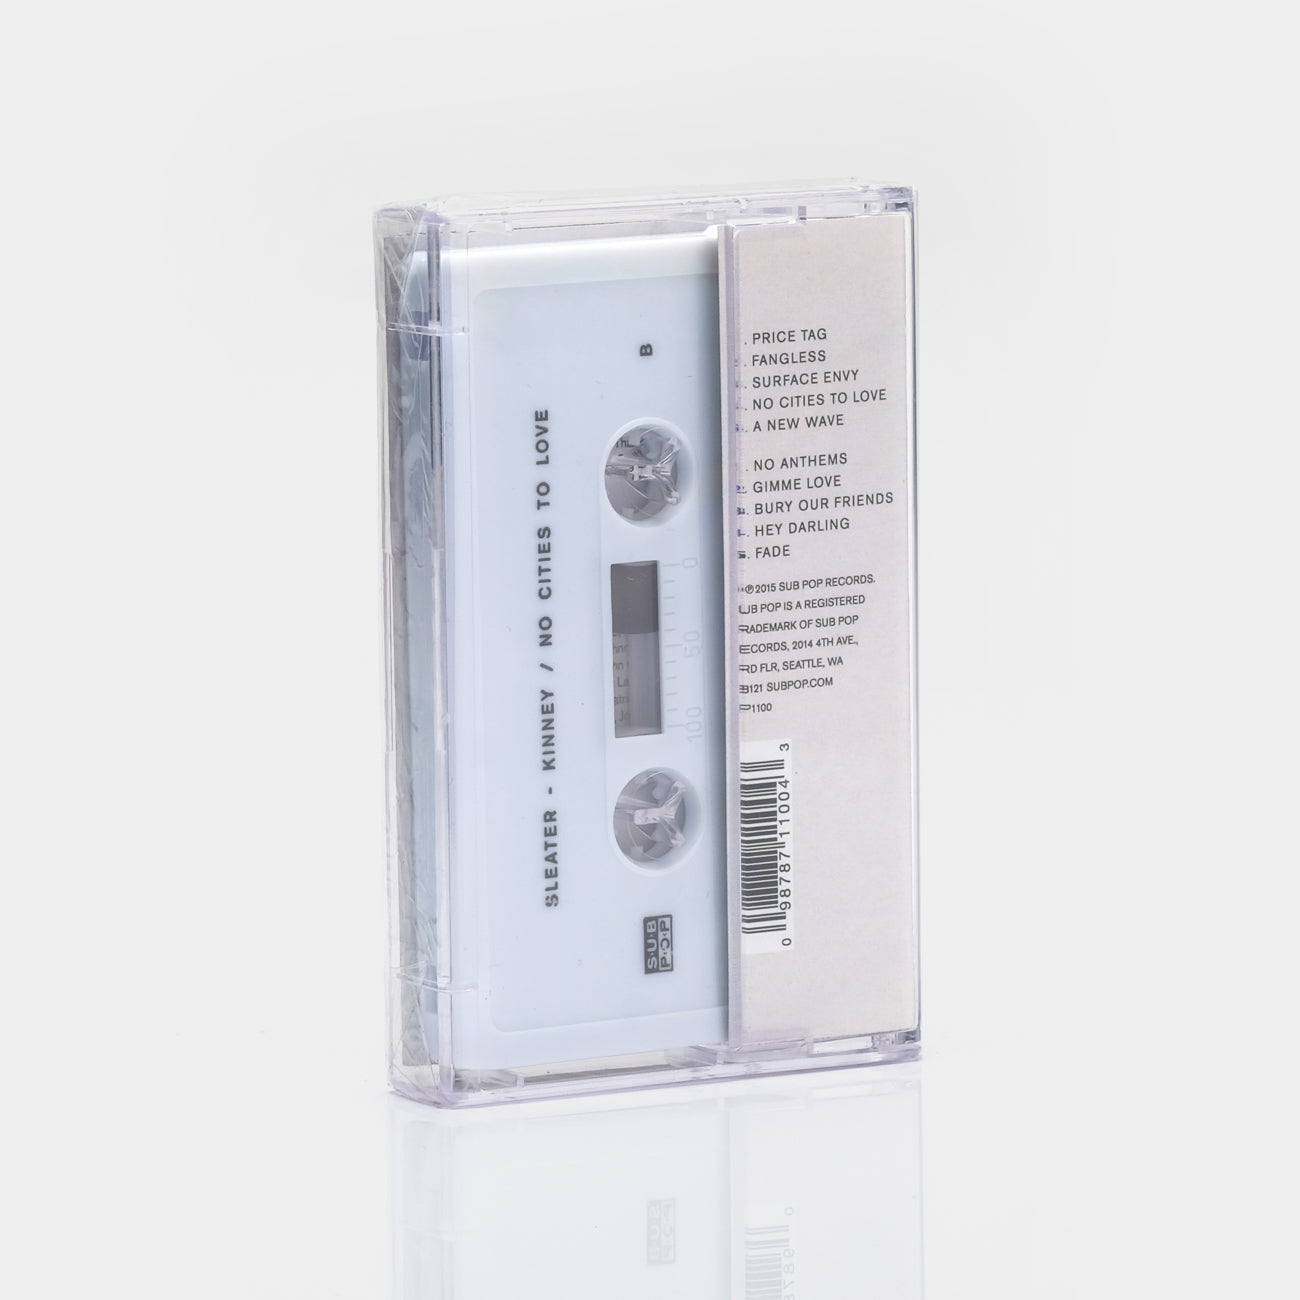 Sleater-Kinney - No Cities To Love Cassette Tape